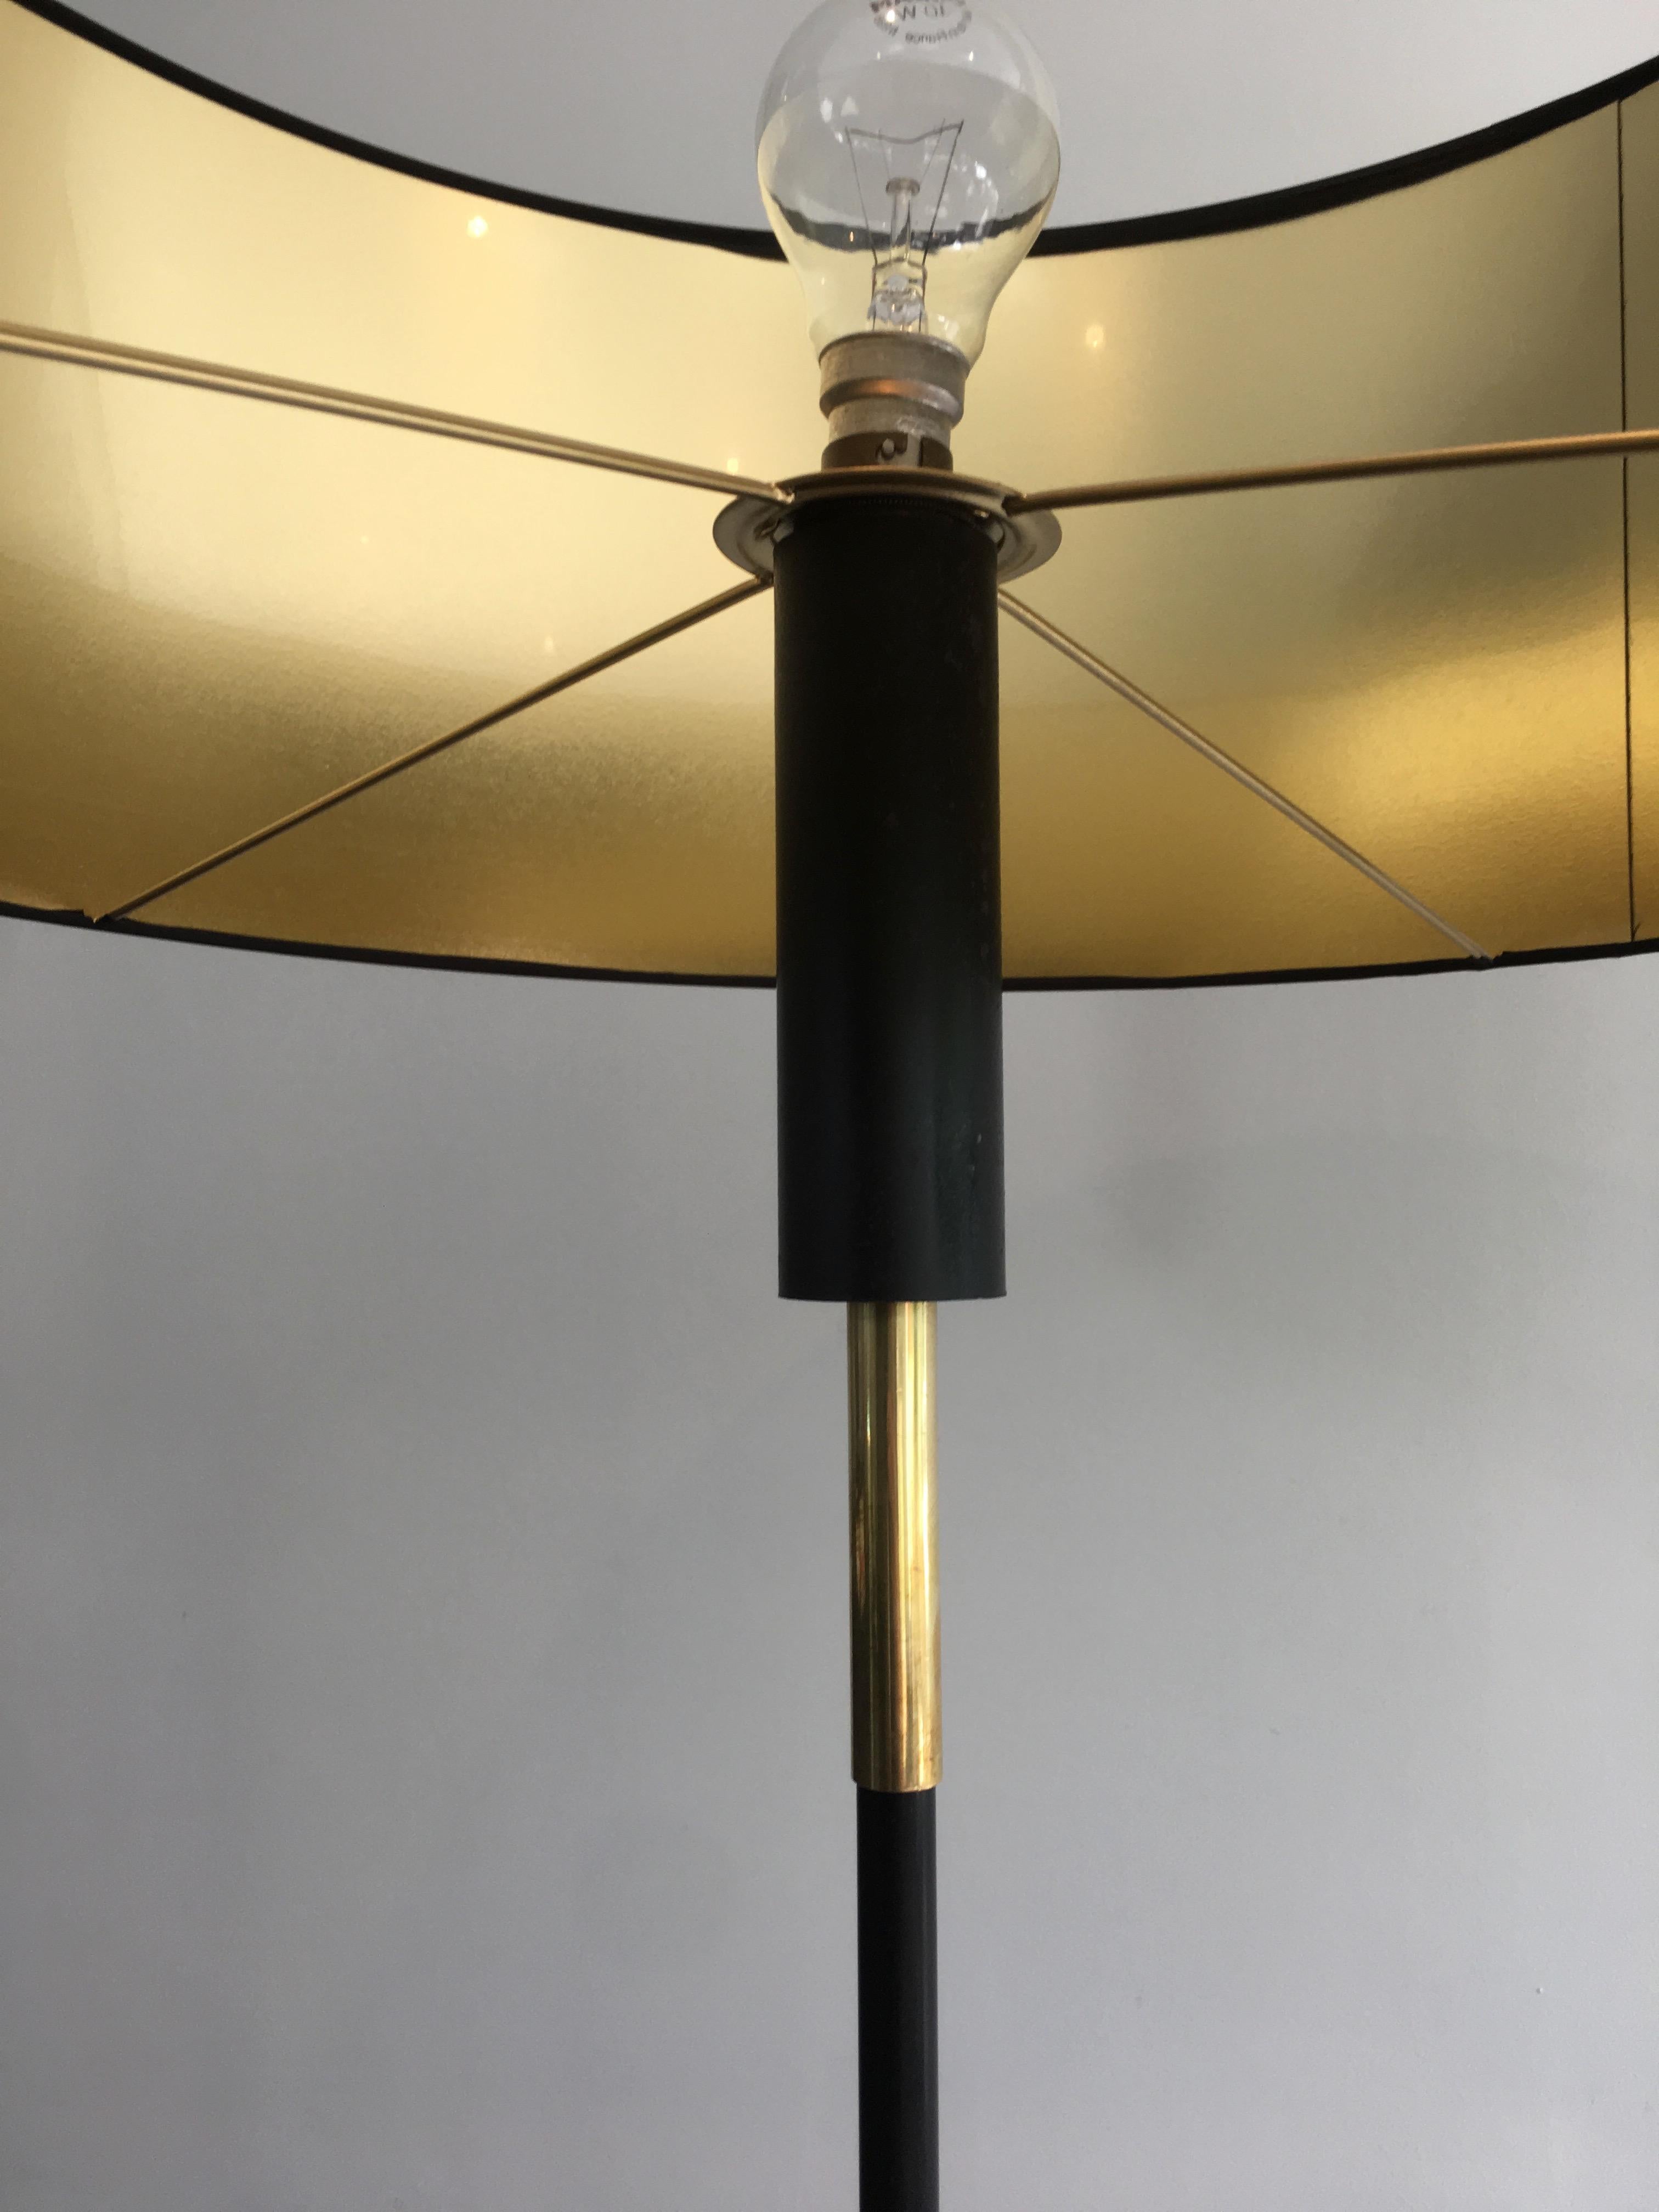 Mid-20th Century Black Lacquered and Brass Design Floor Lamp, French, circa 1950 For Sale